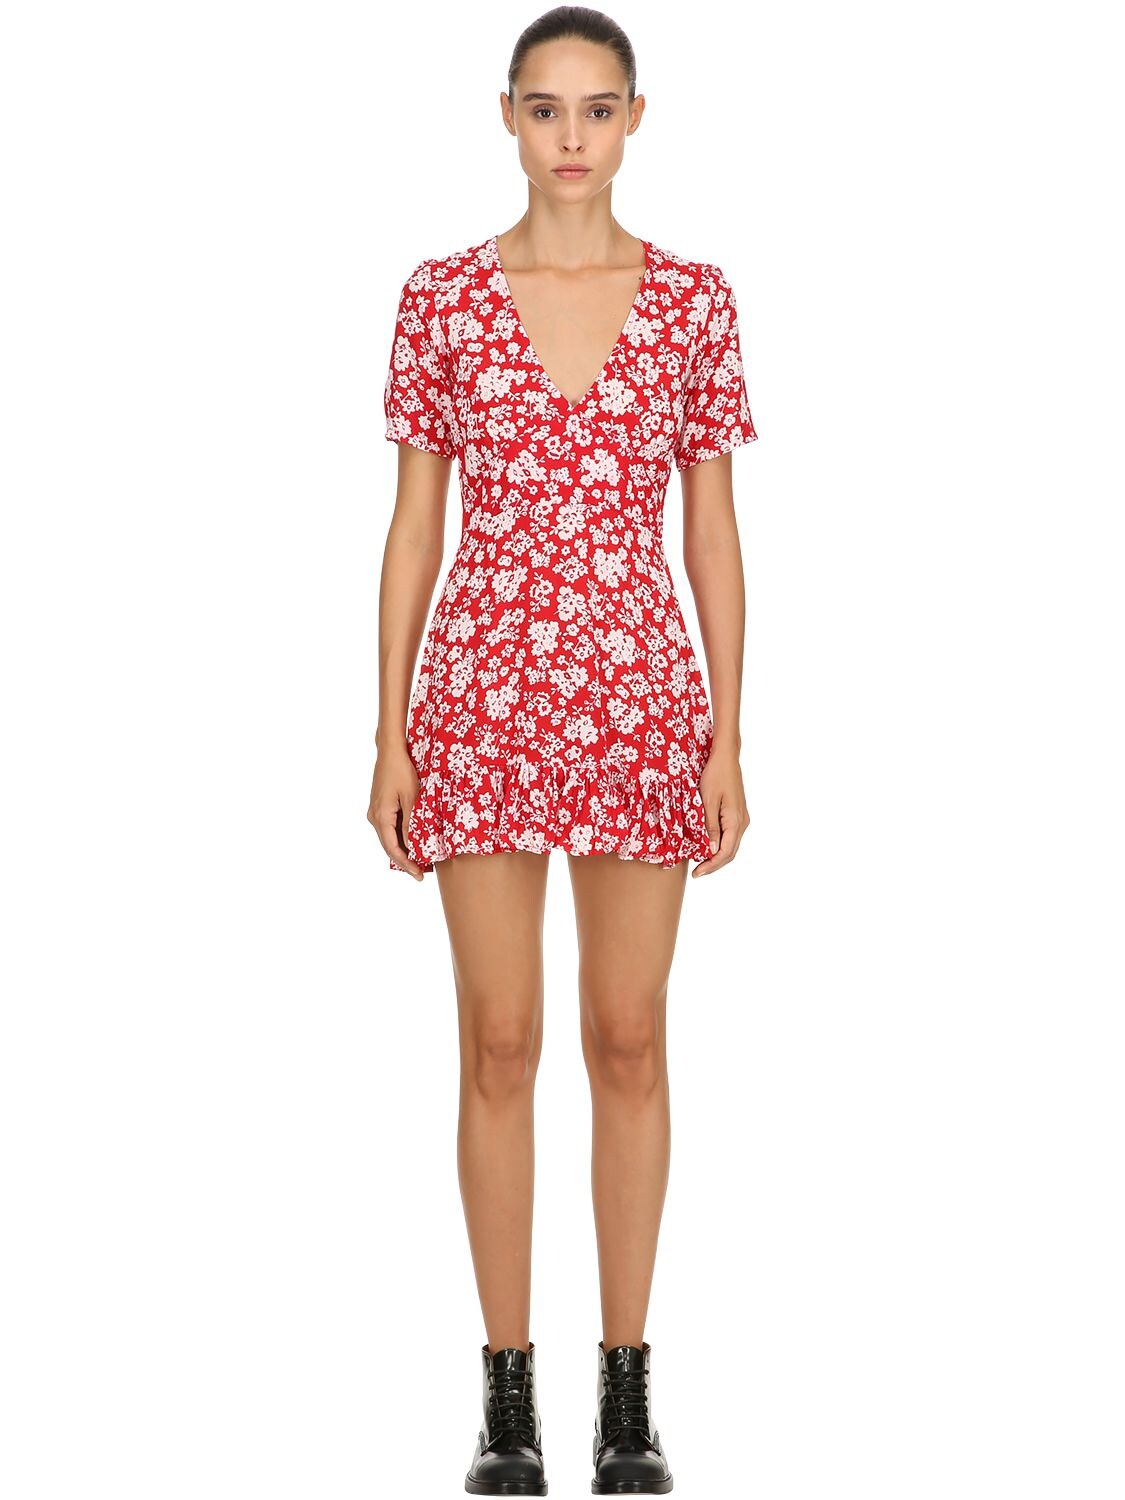 The People Vs Amos Floral Printed Dress In Red